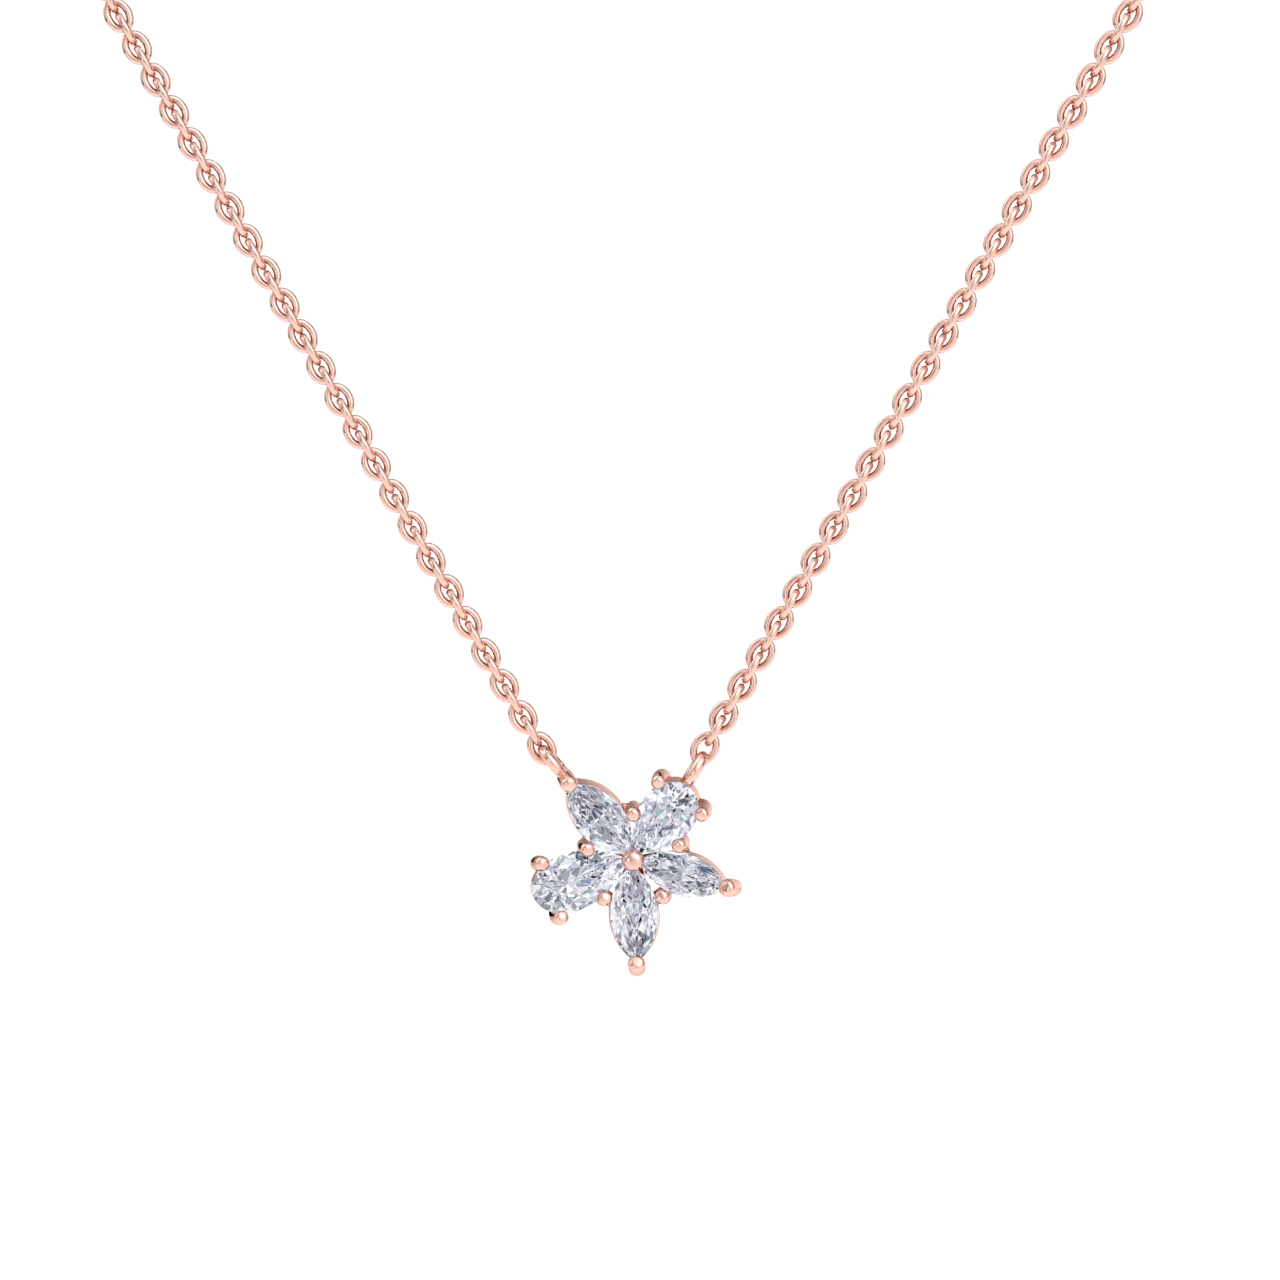 Petite flower necklace in white gold with white diamonds of 0.61 ct in weight

